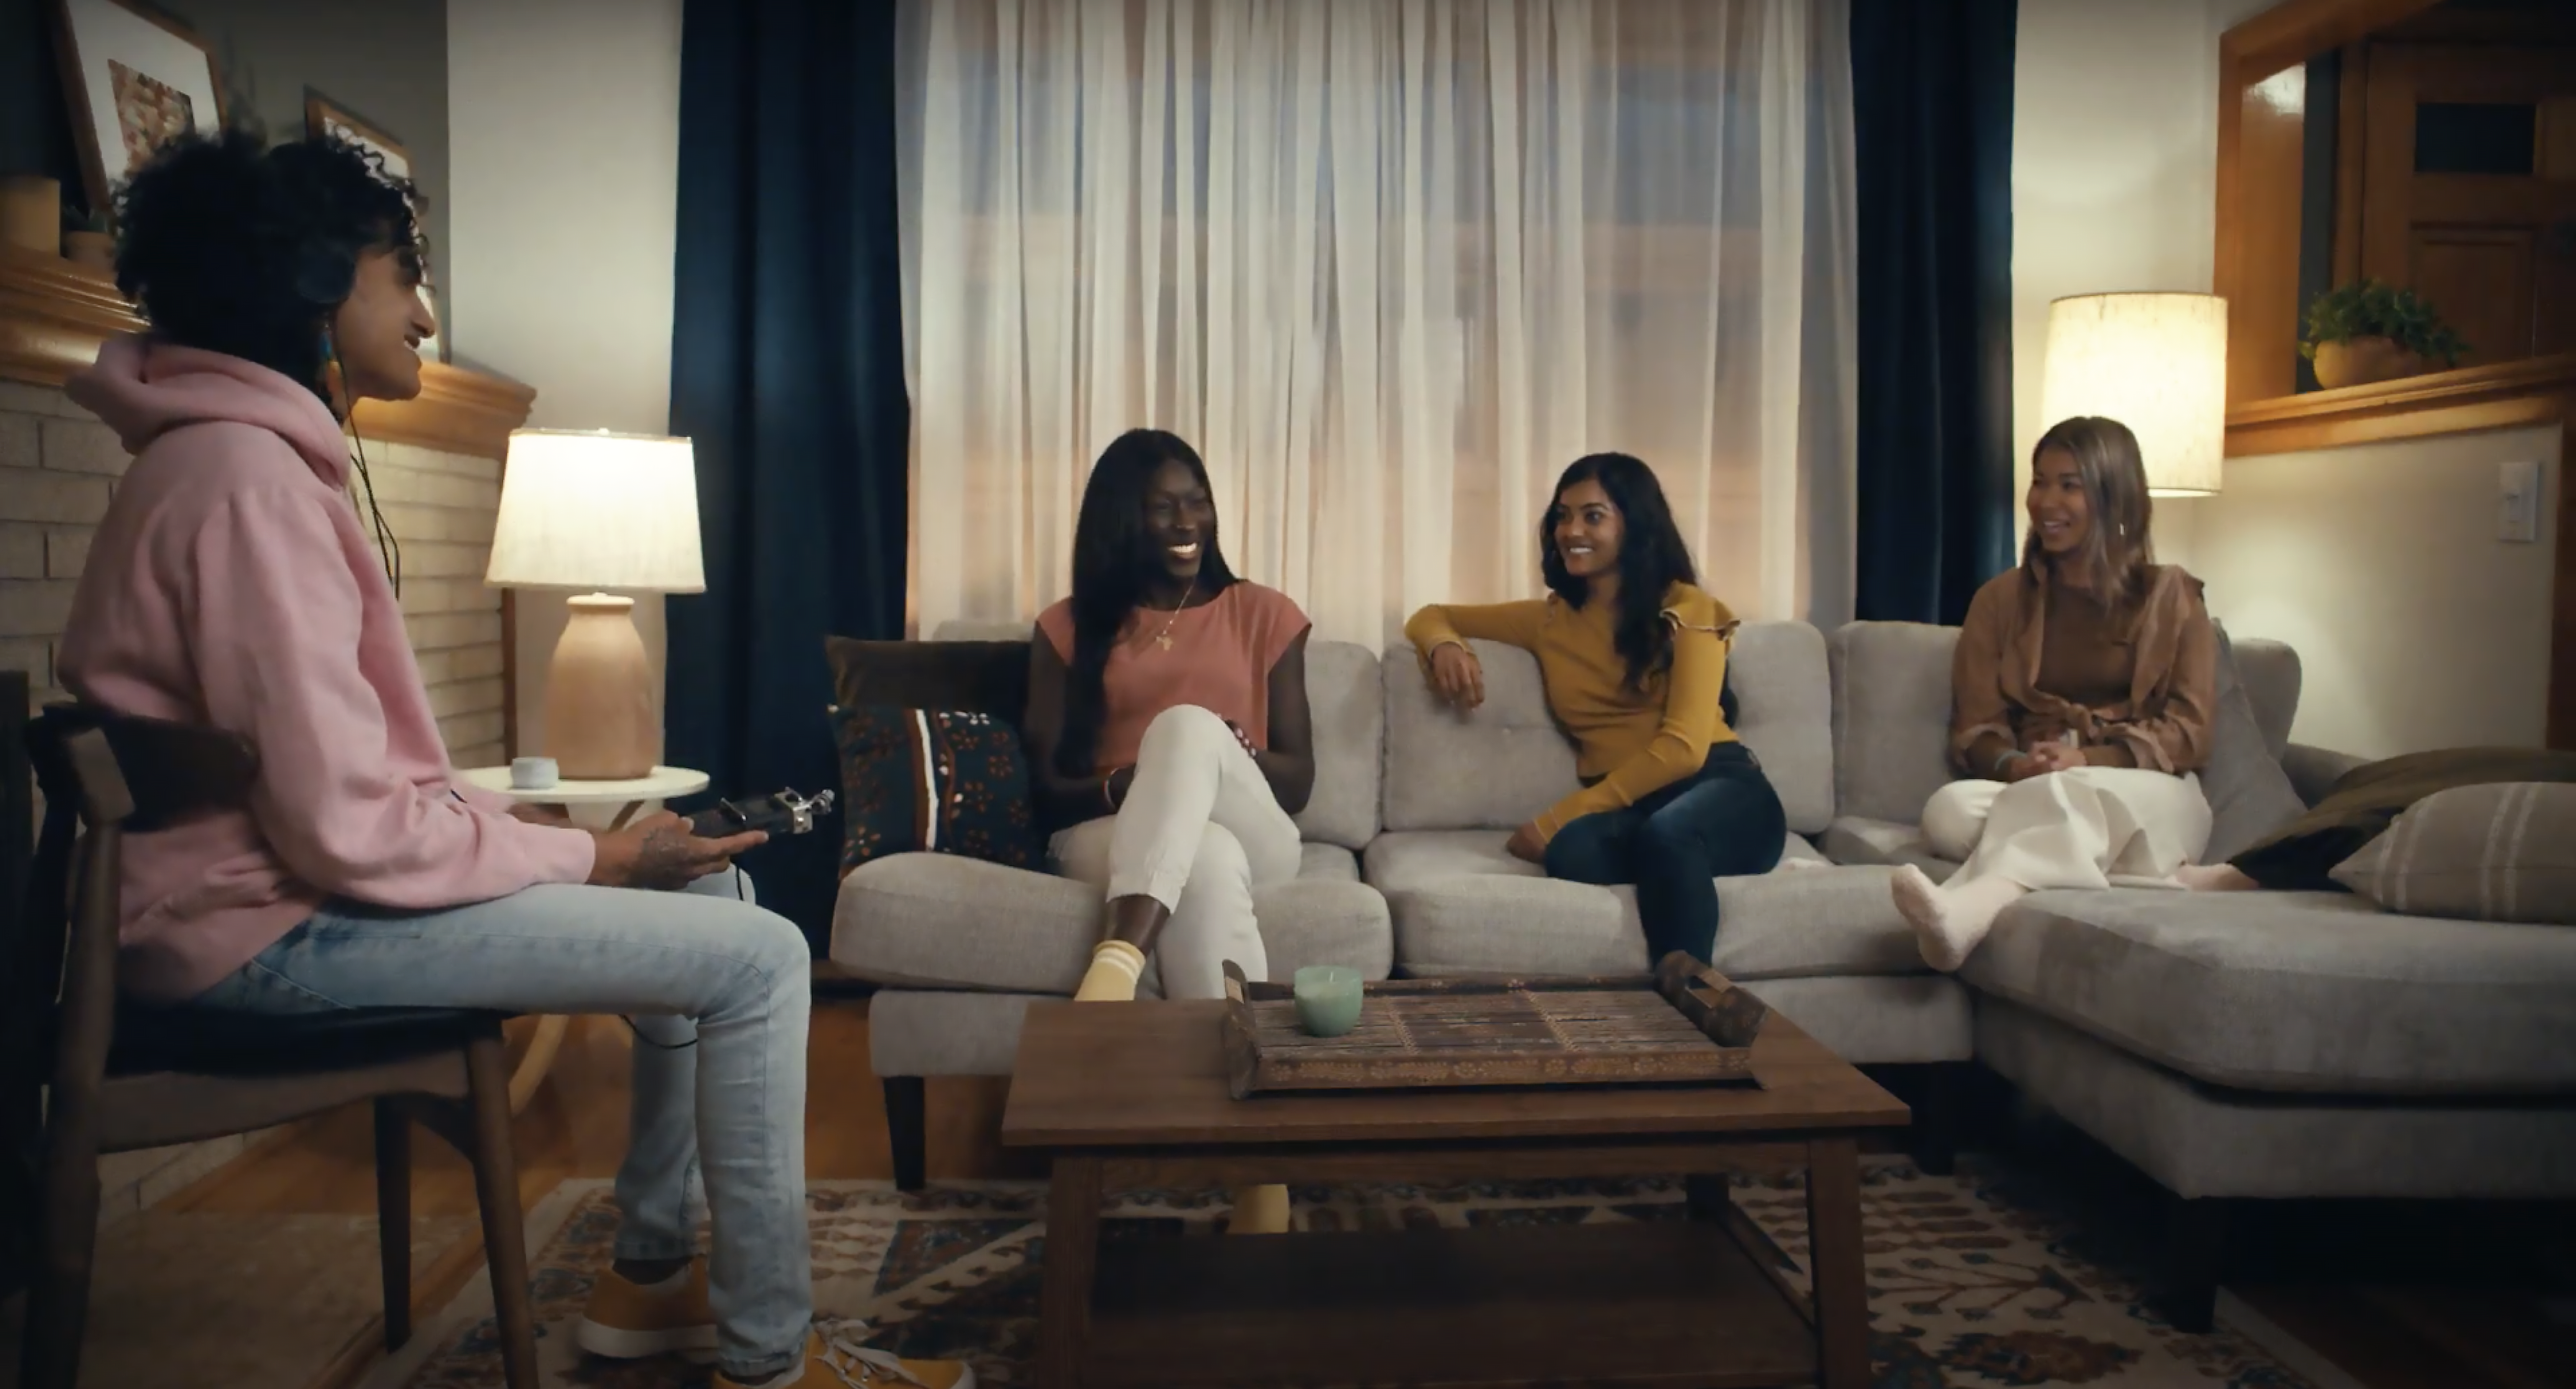 A person sits in a living room with a recording device. They're looking at and recording the conversation of three other people, people of color, who are sitting on a couch across the room from them.